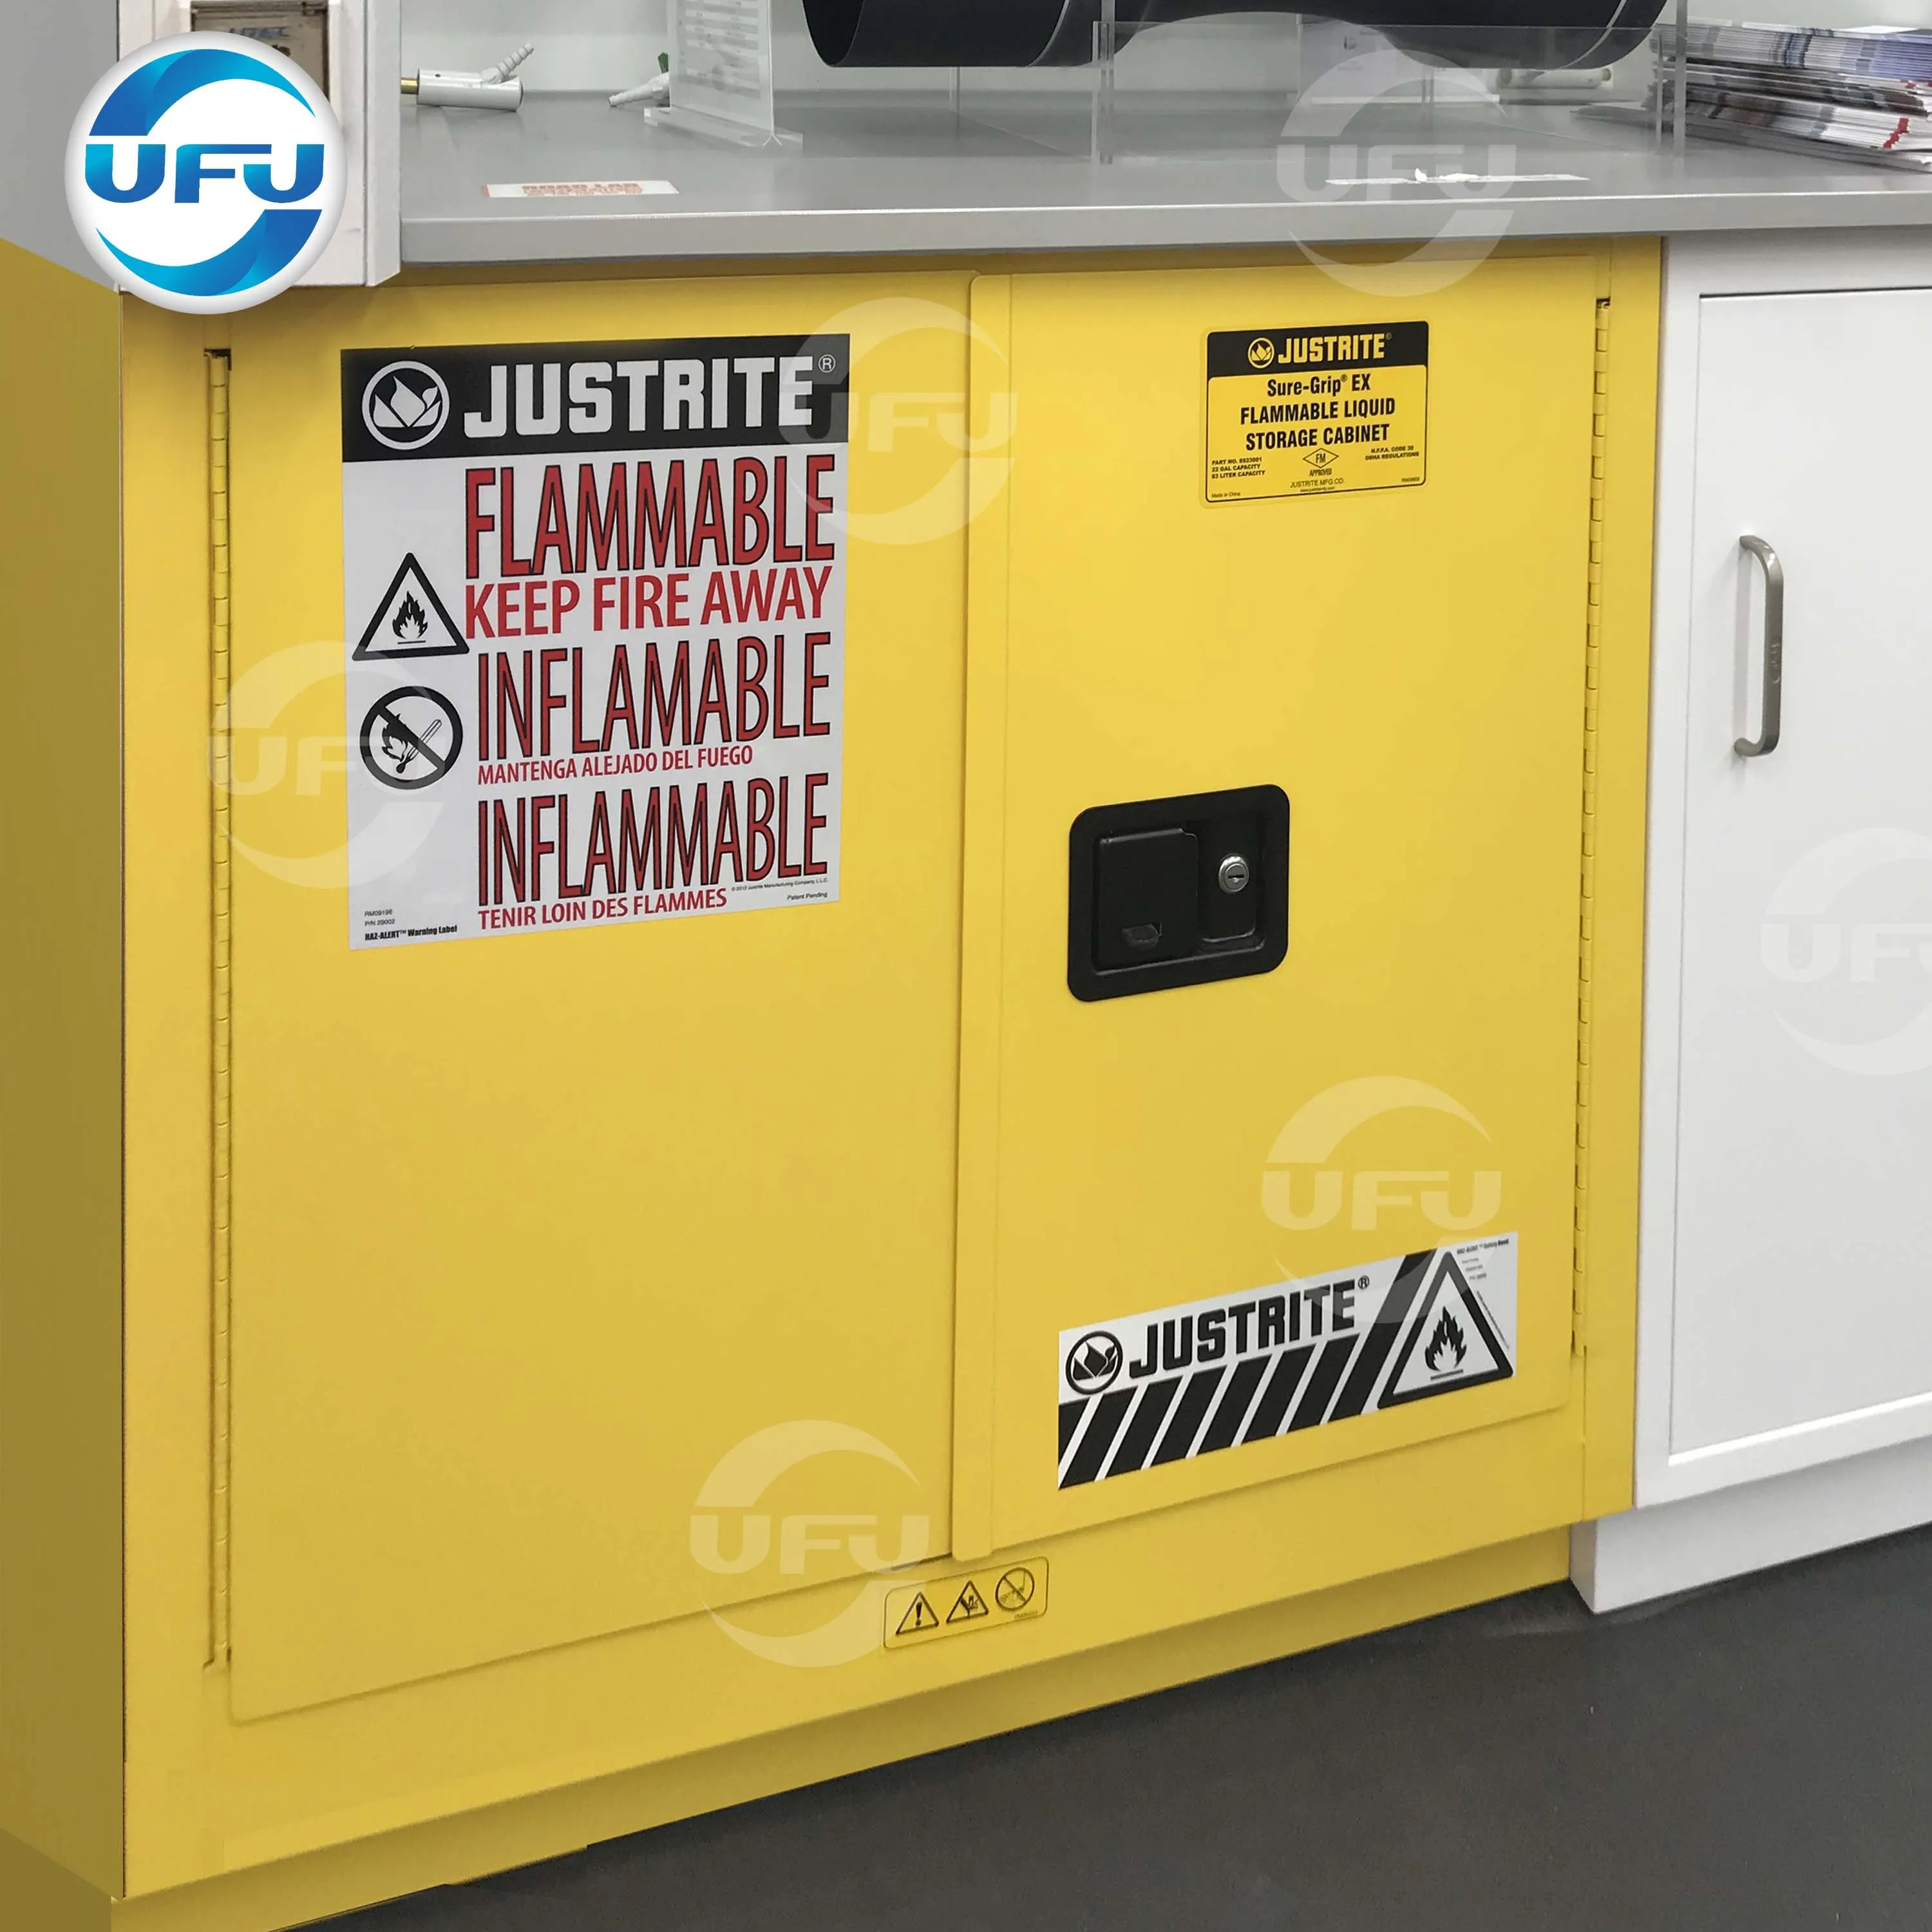 China Flammable Cabinet China Flammable Cabinet Manufacturers And